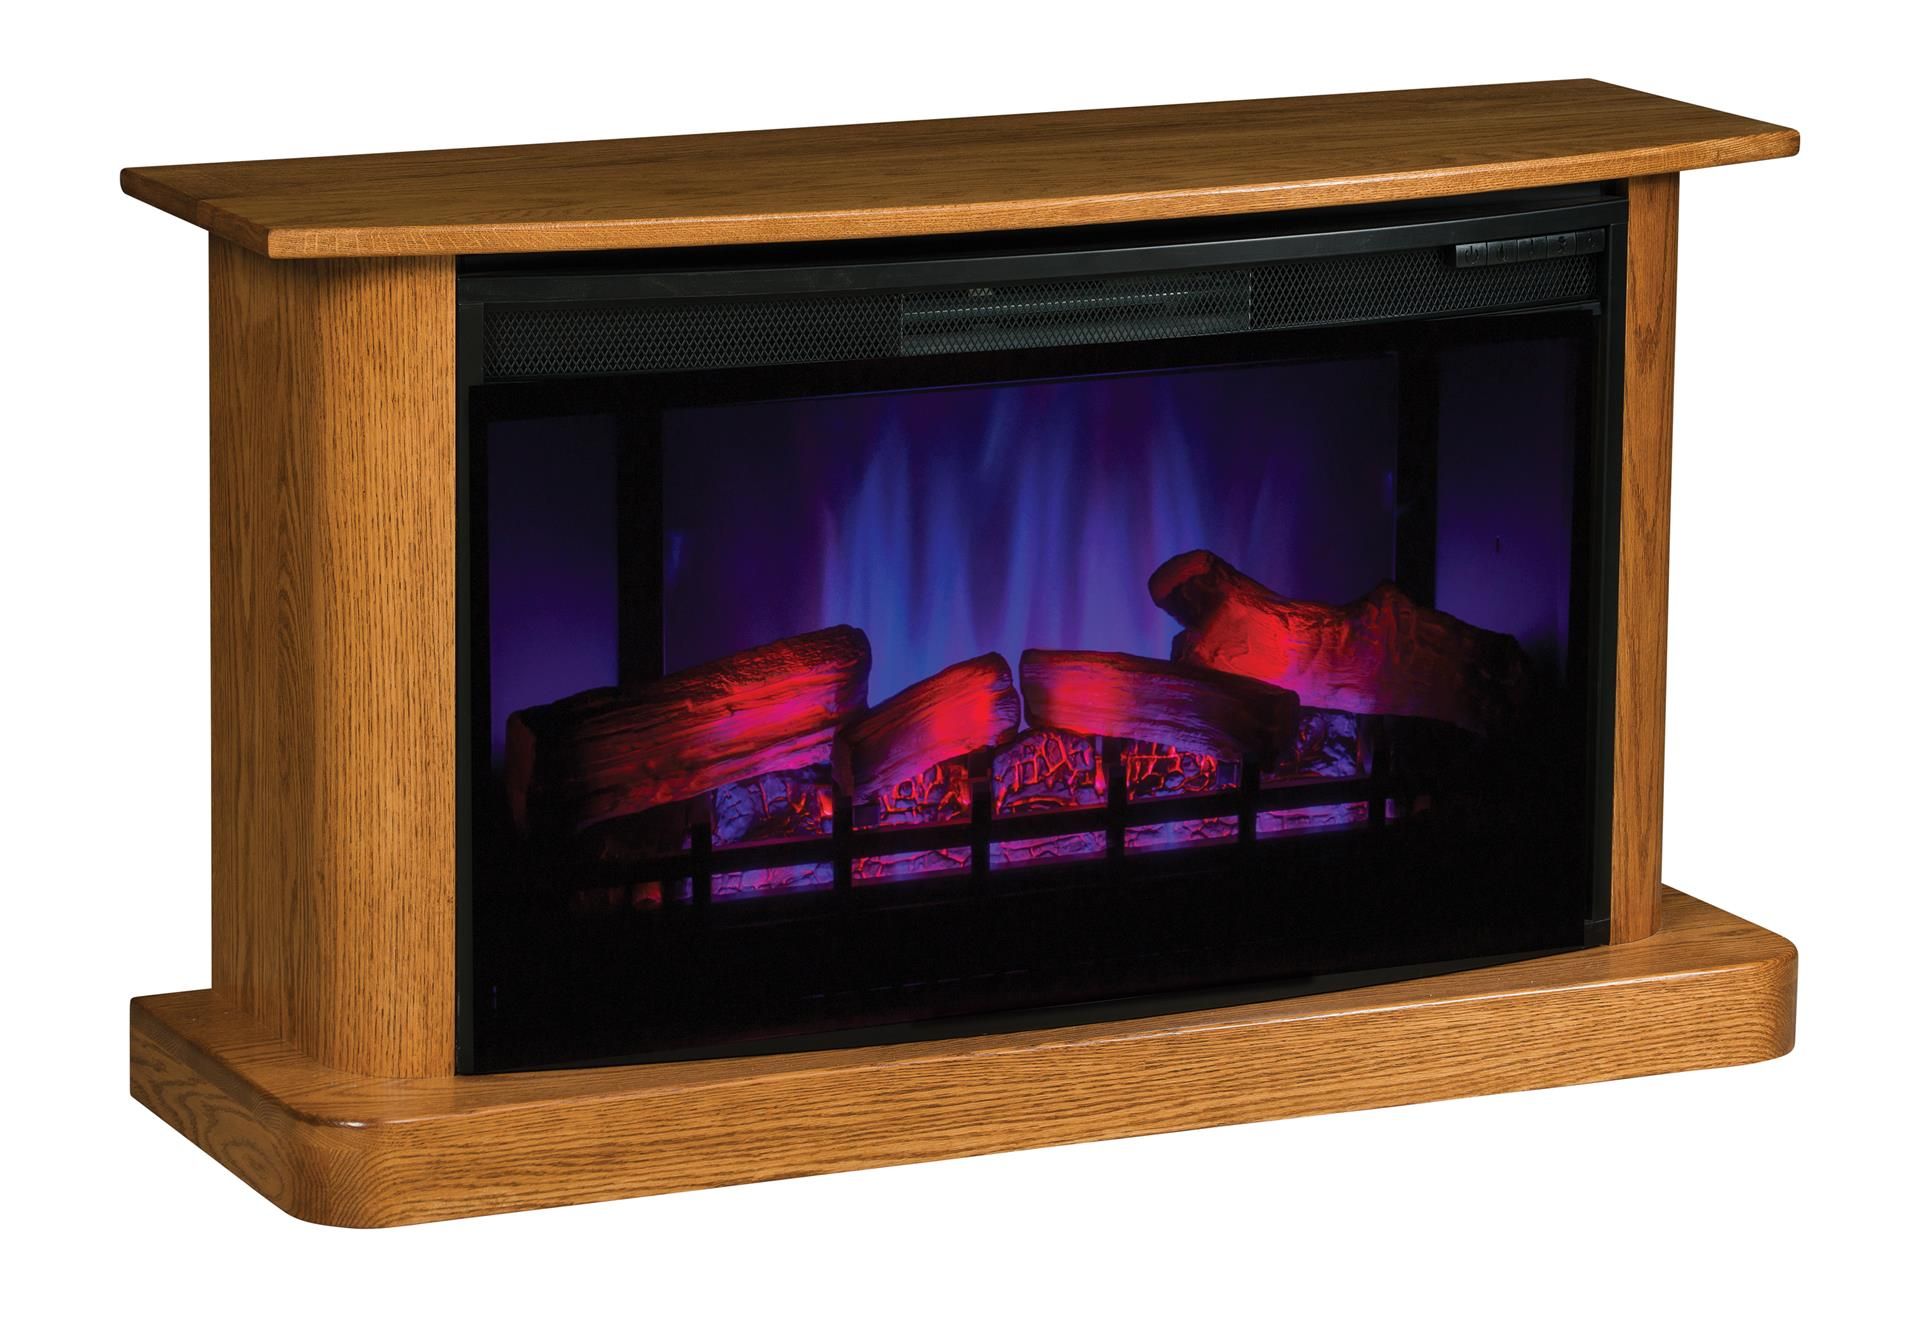 Portable Wood Fireplace Unique Amish Electric Fireplace with Remote